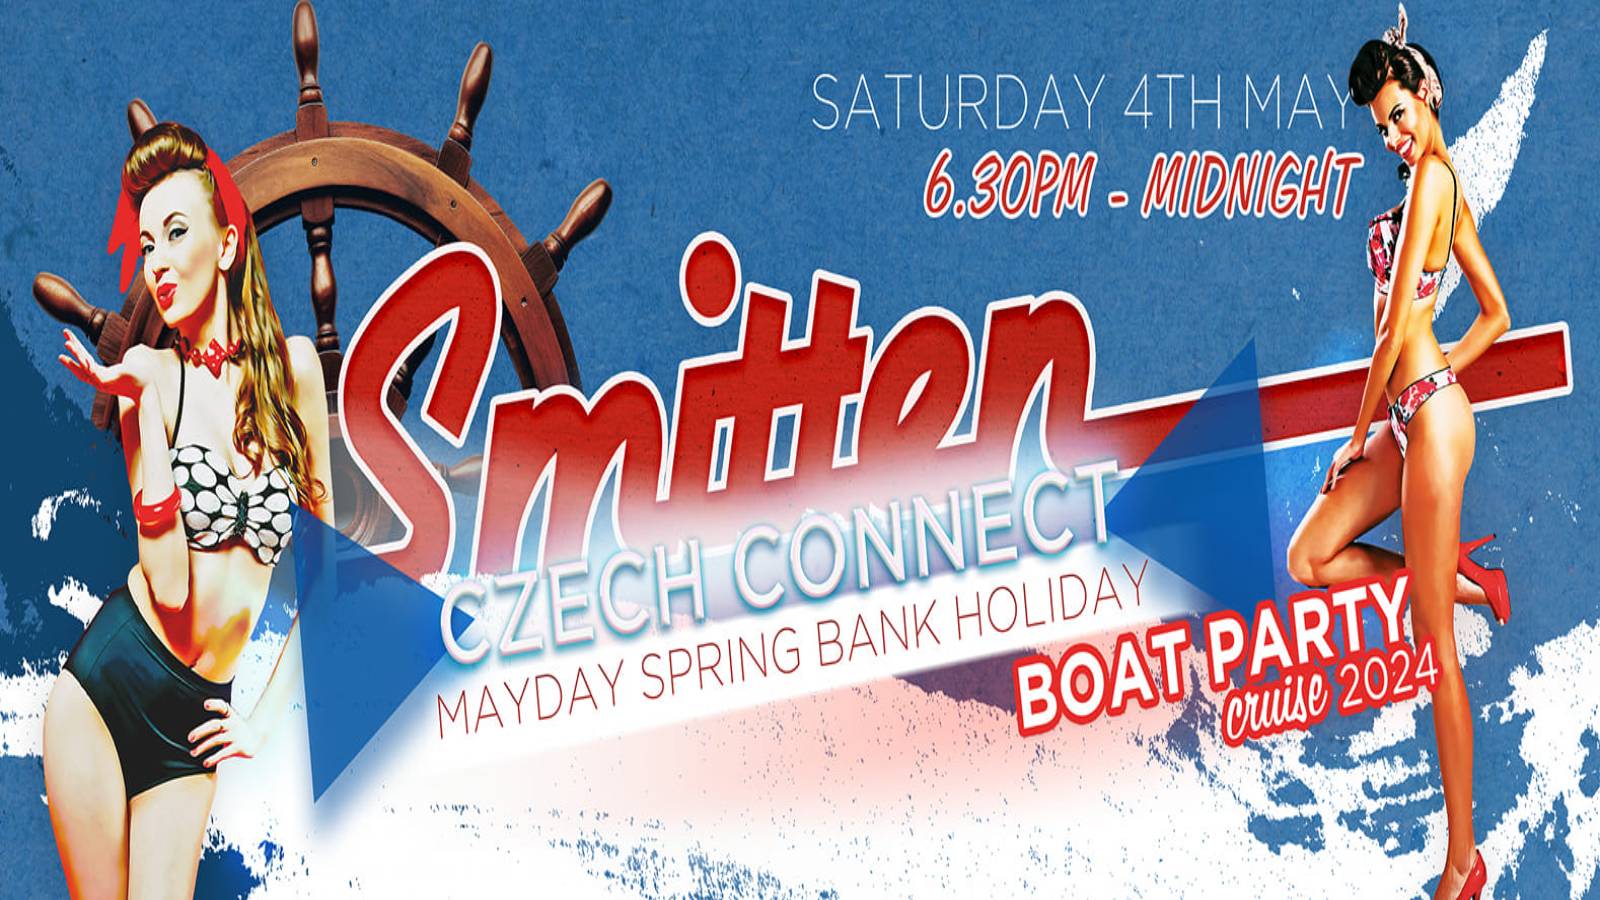 Smitten are delighted to announce the first Smitten party of 2024, where we will be revisiting the highly popular ‘Girls on Top’ boat party format and also inviting over our ‘Women Power’ friends to entertain you on the lower deck, directly from the Czech Republic!